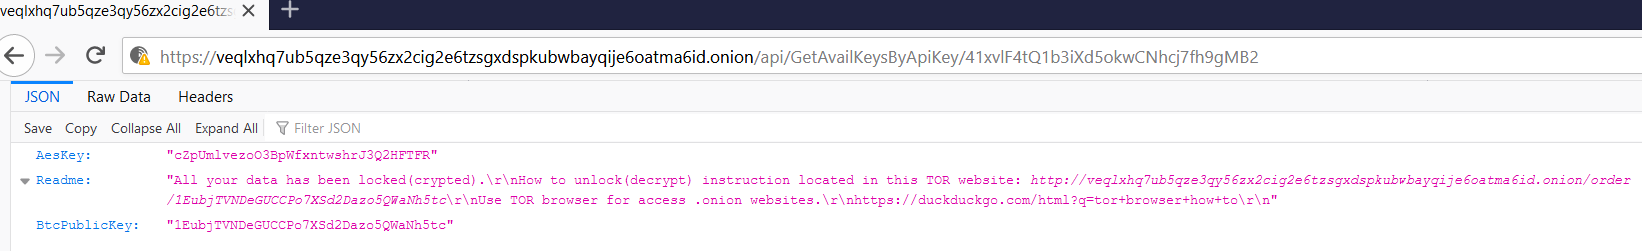 Live C2 URLs returned a response with the JSON object described above, as seen here.